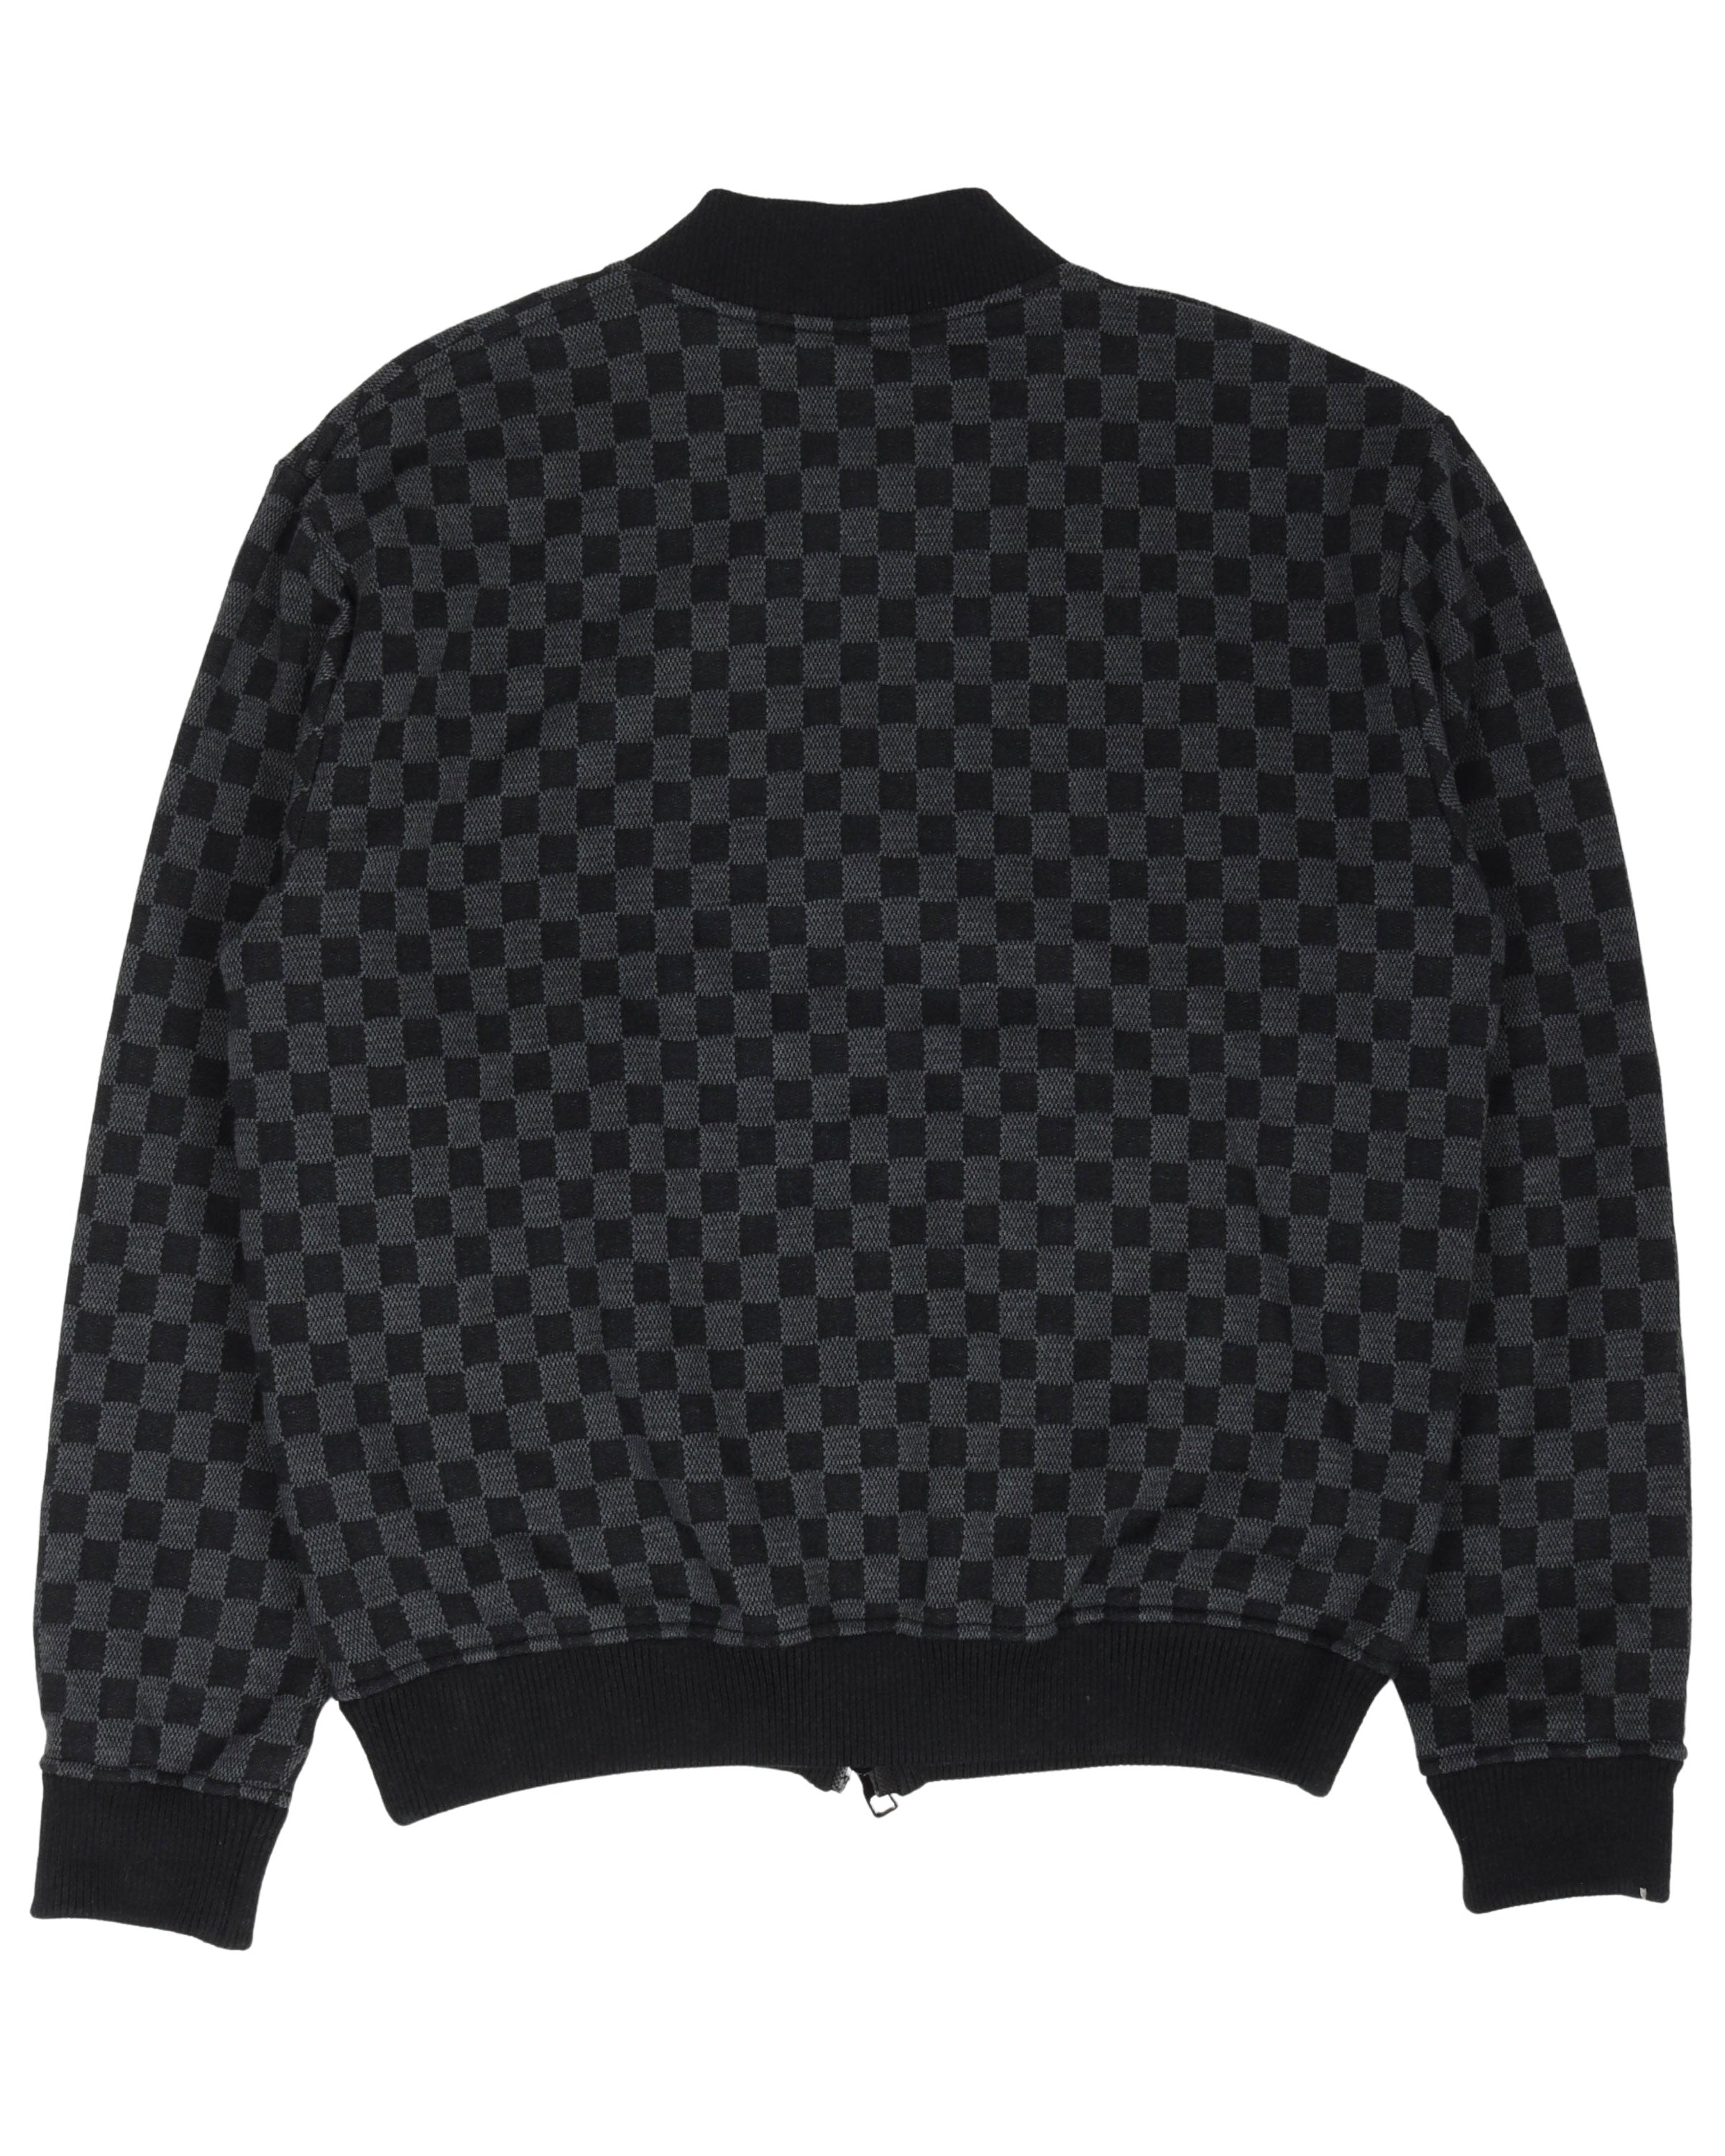 Louis Vuitton black pattern hoodie, bomber jacket - LIMITED EDITION